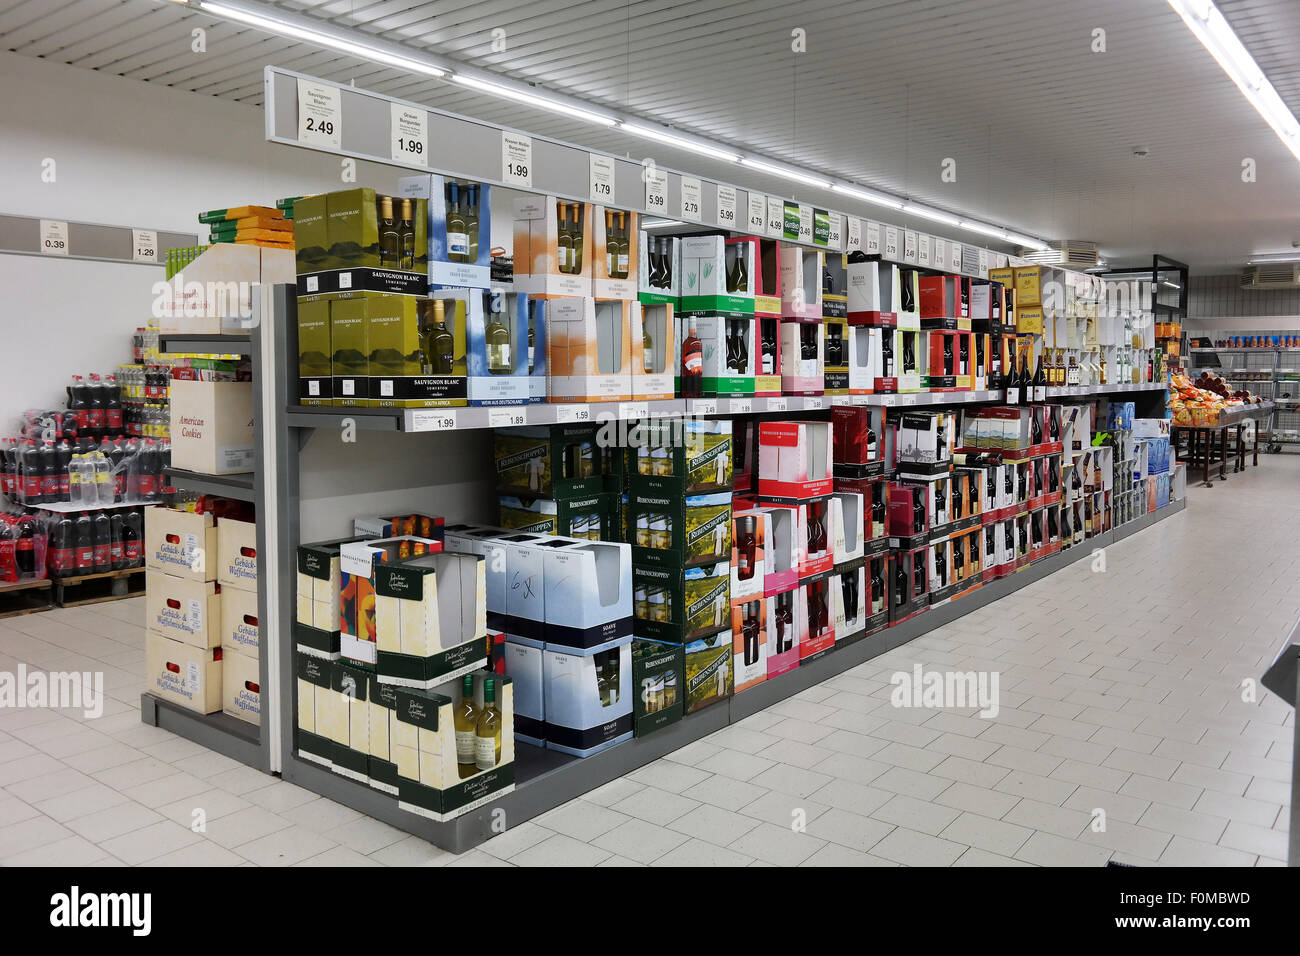 Alcoholic Beverages section of an Aldi discount supermarket in Germany Stock Photo